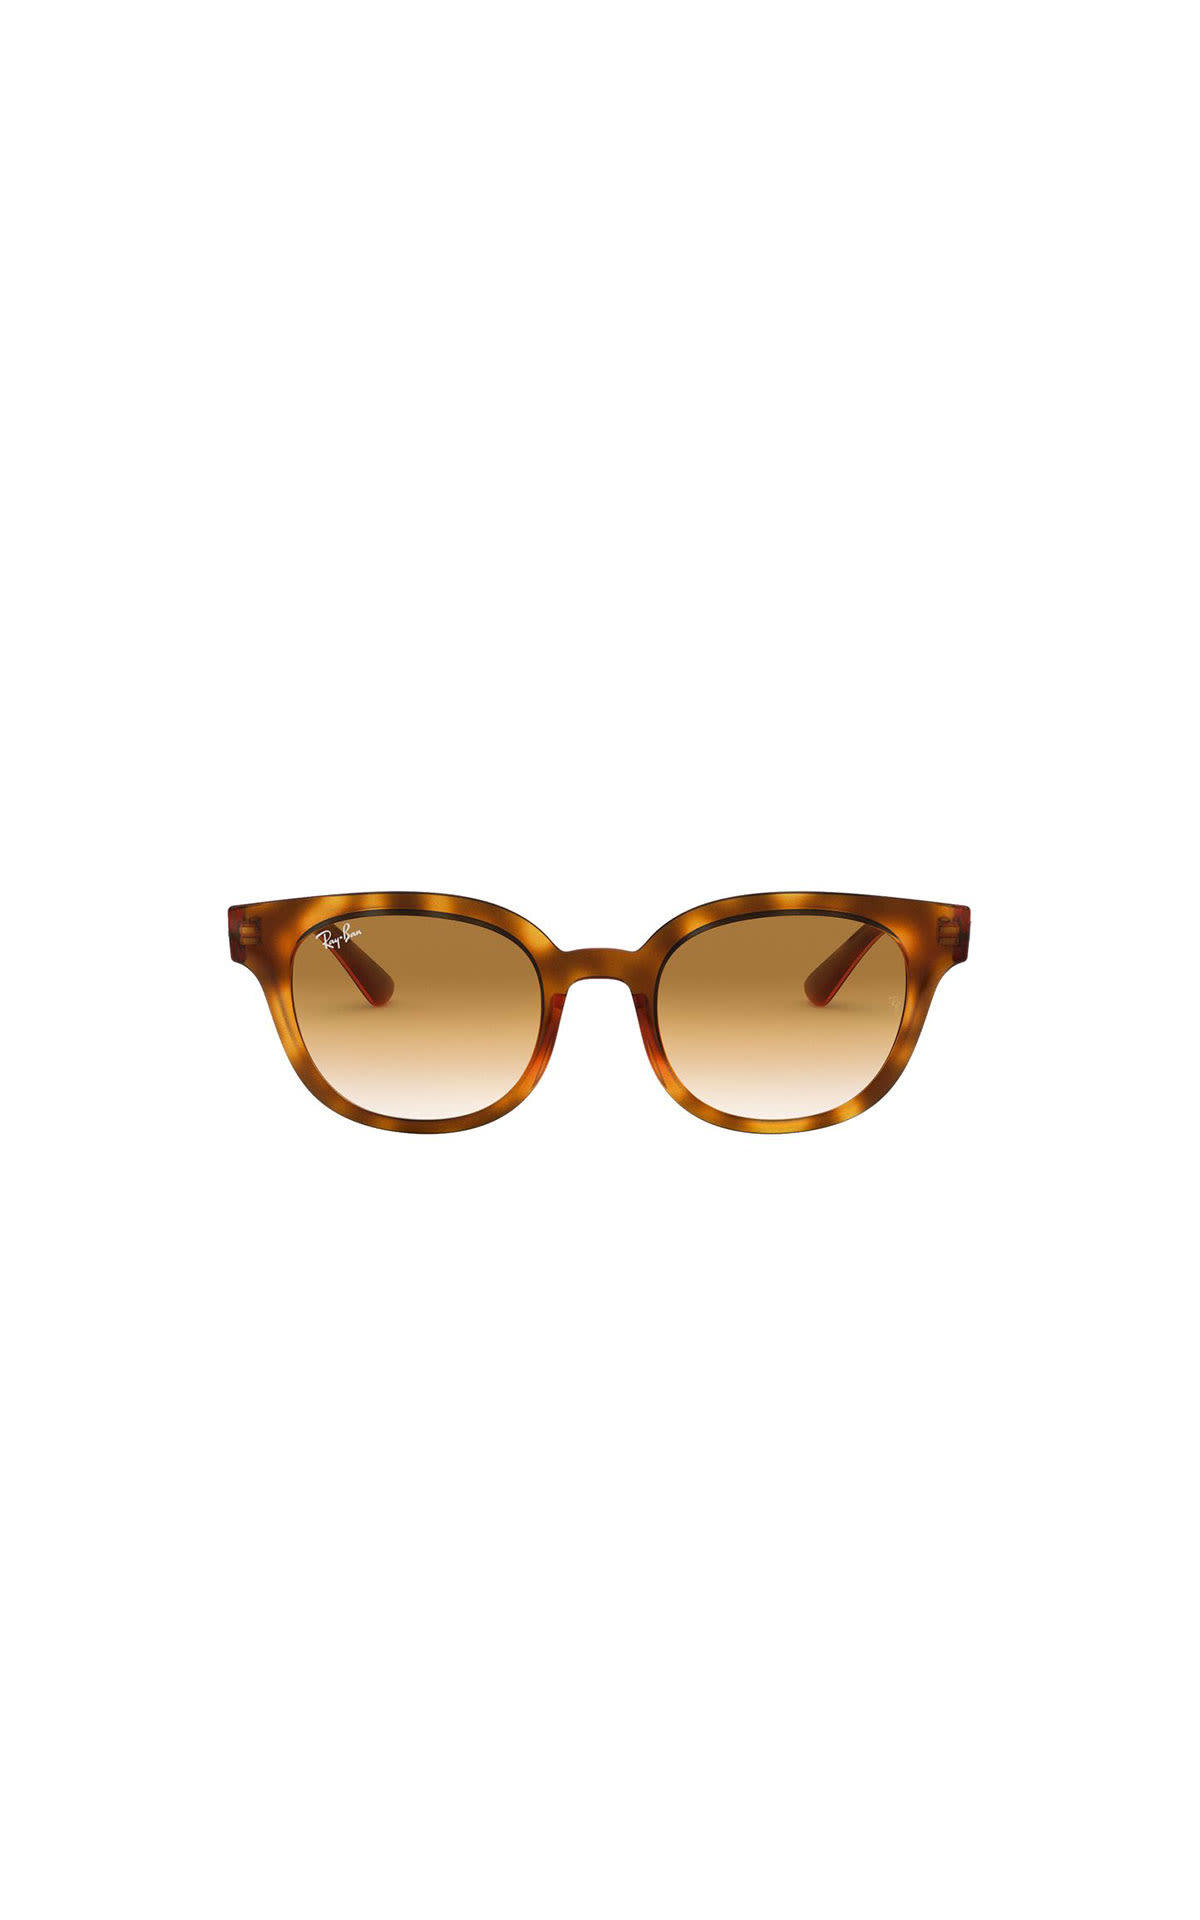 David Clulow Rayban yellow gold from Bicester Village